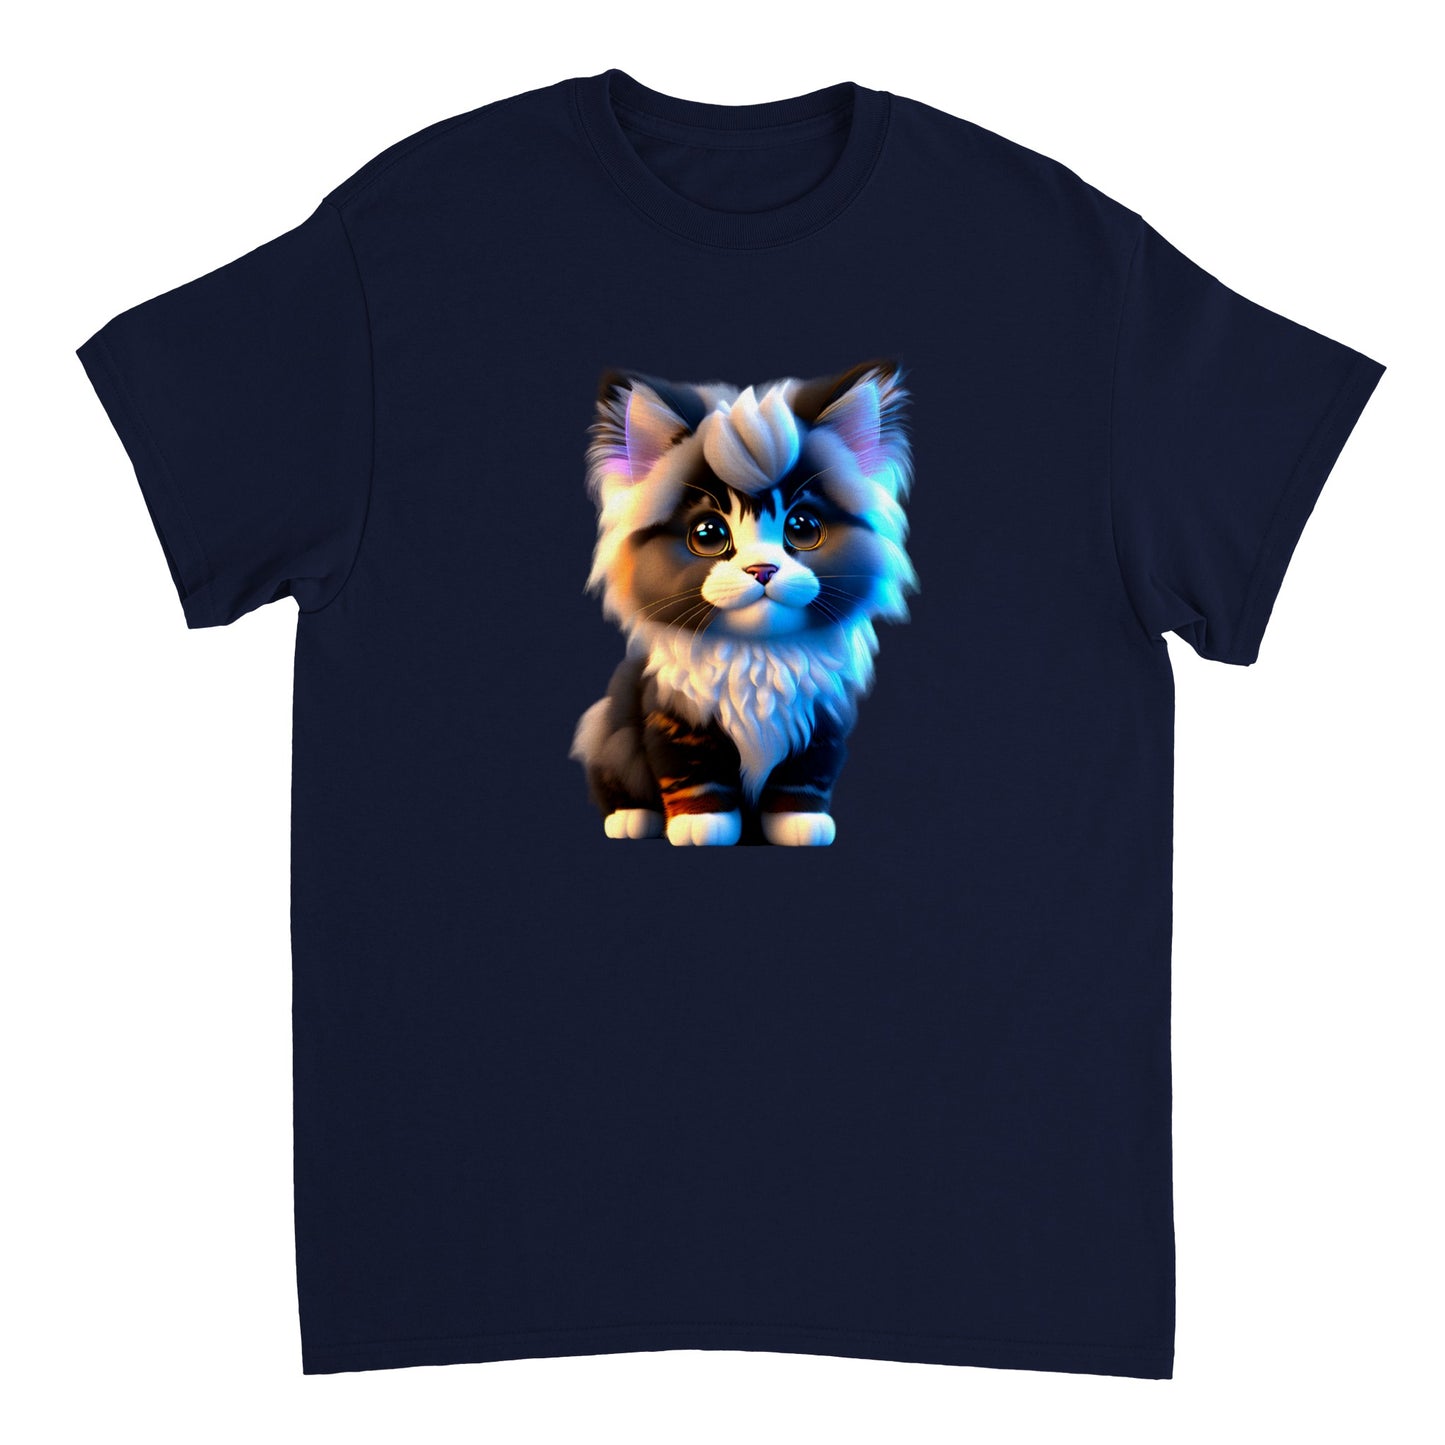 Adorable, Cool, Cute Cats and Kittens Toy - Heavyweight Unisex Crewneck T-shirt 10